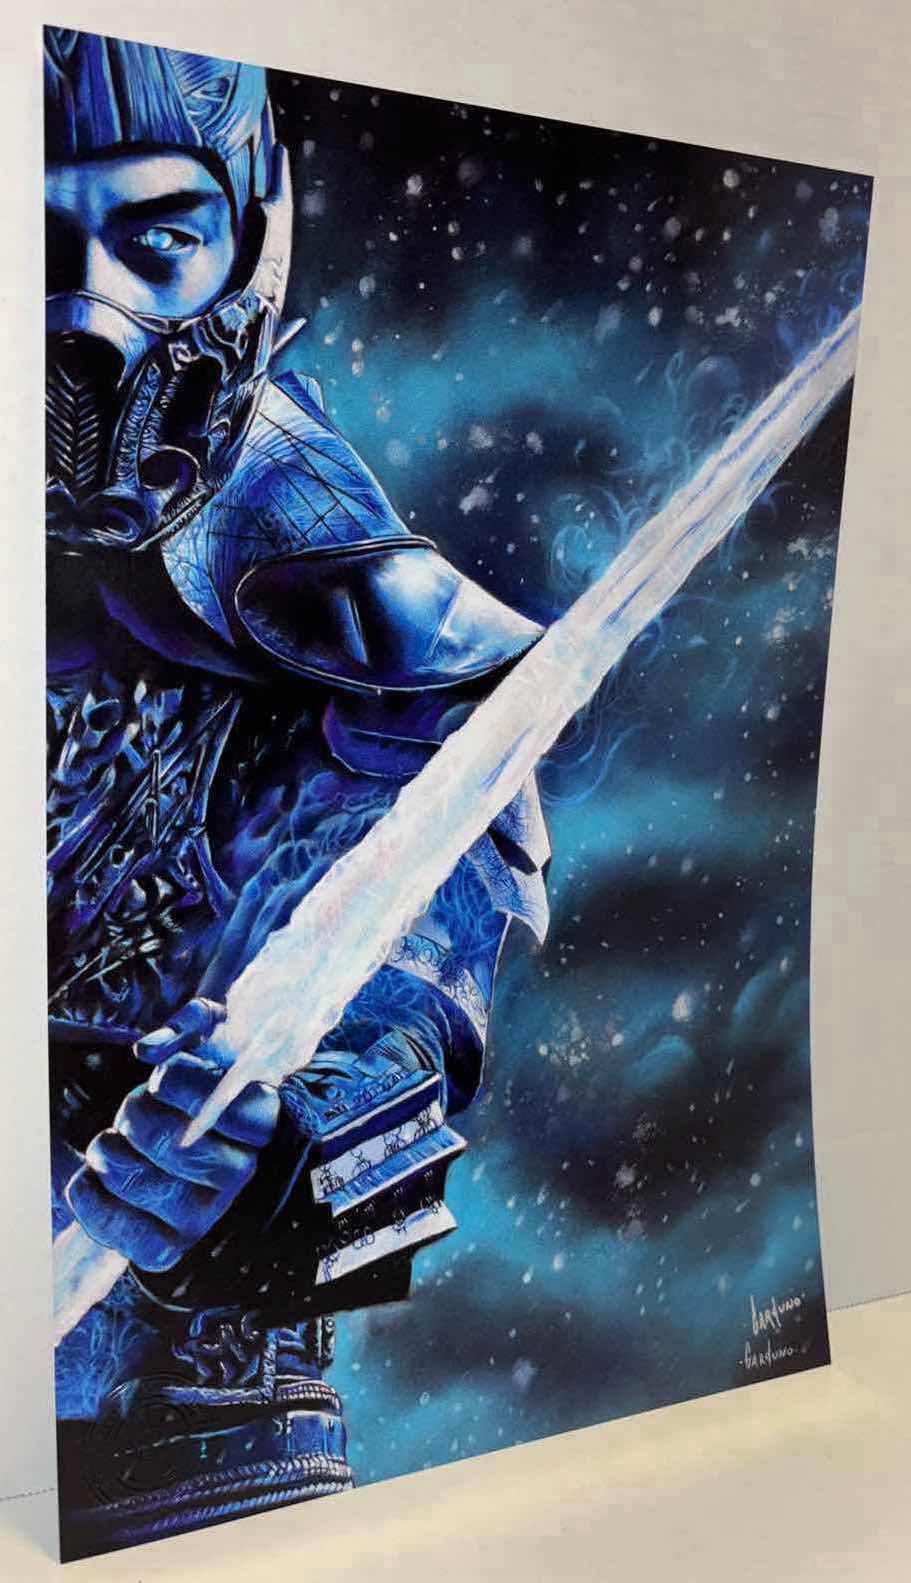 Photo 1 of VICTOR GARDUNO “ICE SWORD” 11” X 17” INFINITY GLOSS UNFRAMED PRINT W EMBOSSED SEAL, DIGITAL SIGNATURE & OFFICIAL SIGNATURE W COA INCLUDED, STORED IN A RIGID PRINT PROTECTOR SLEEVE